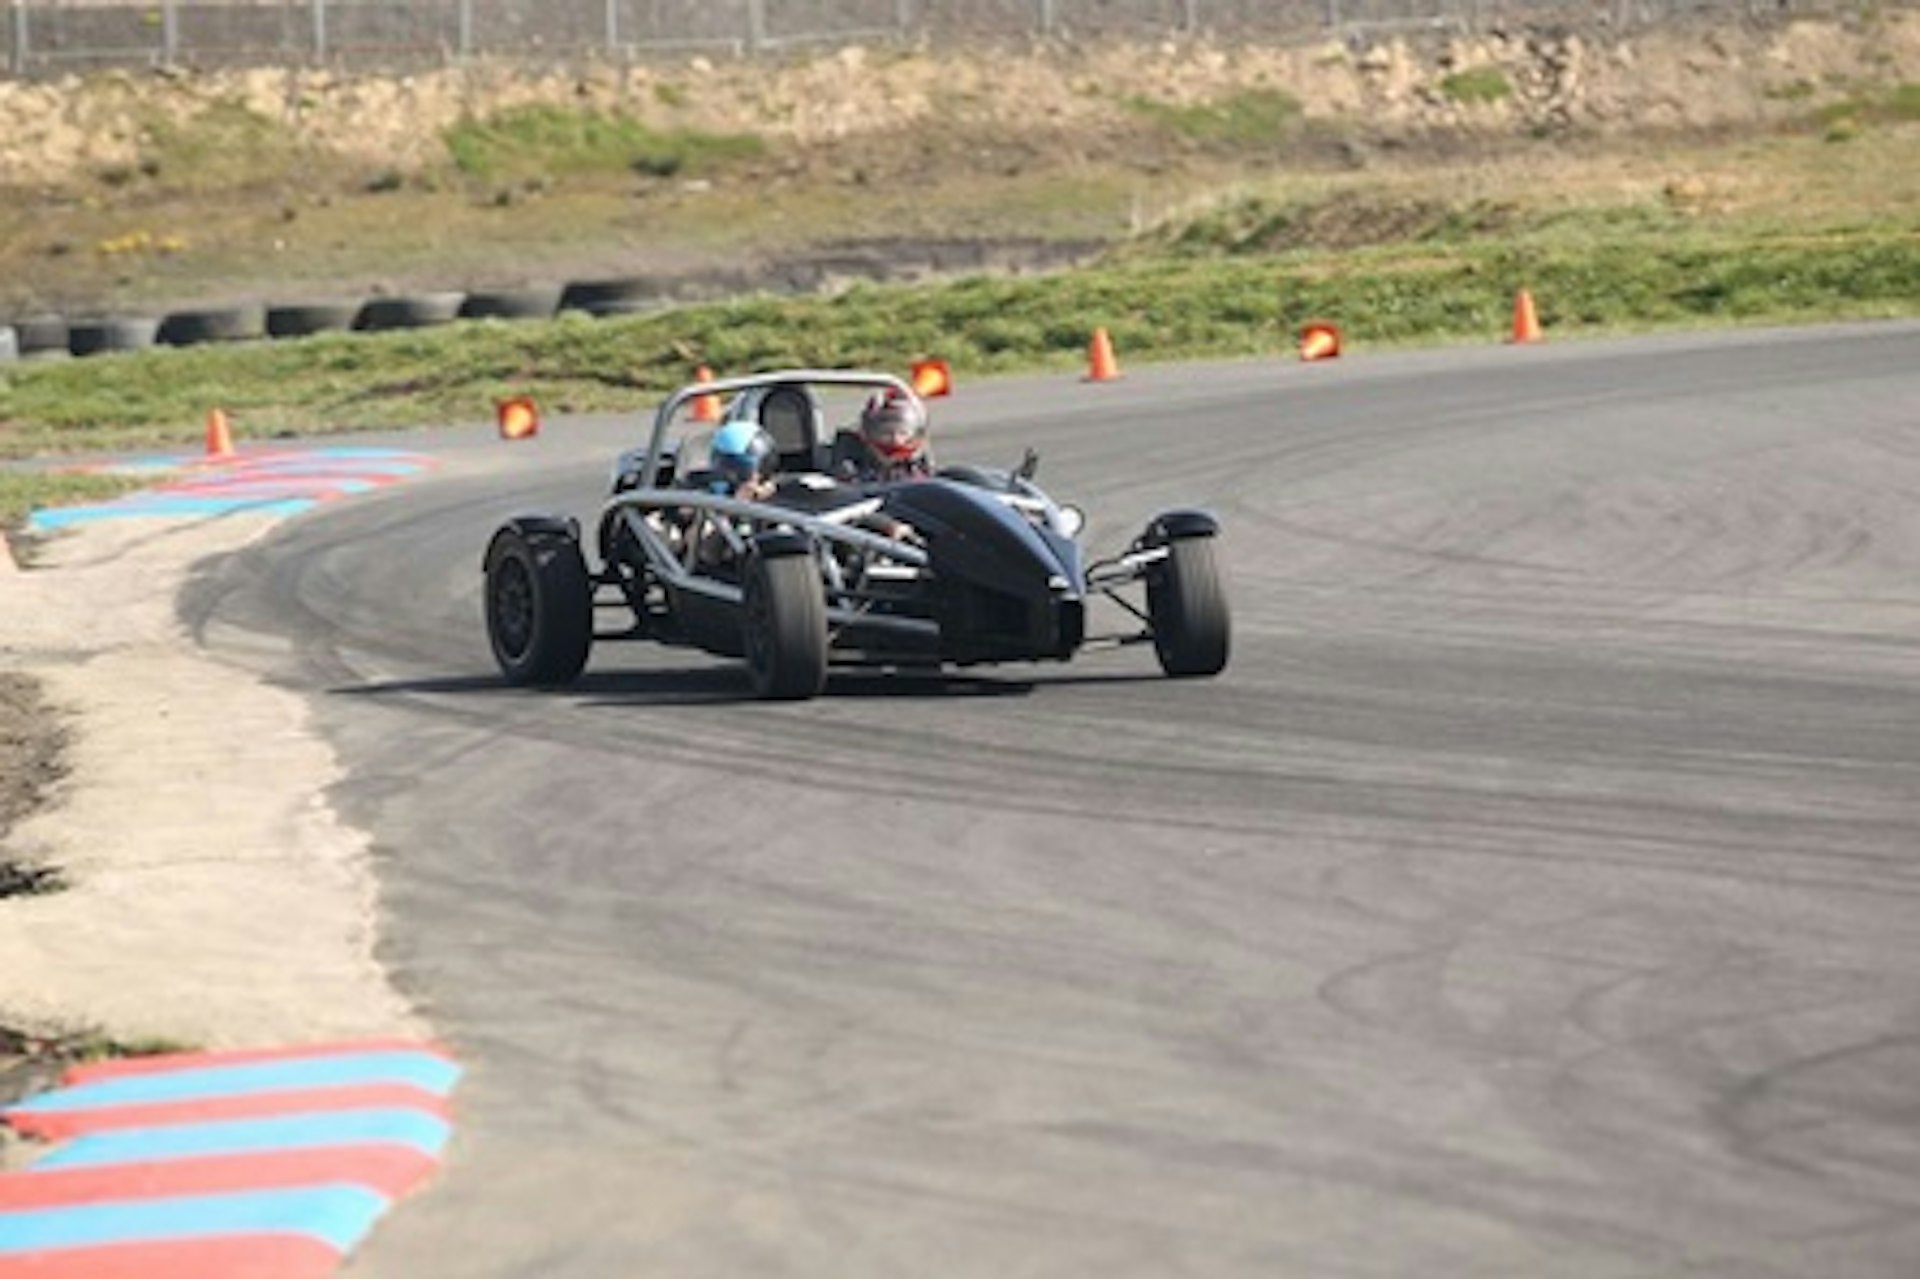 Ultimate Double Ariel Atom Experience with Hot Lap - Anytime 2